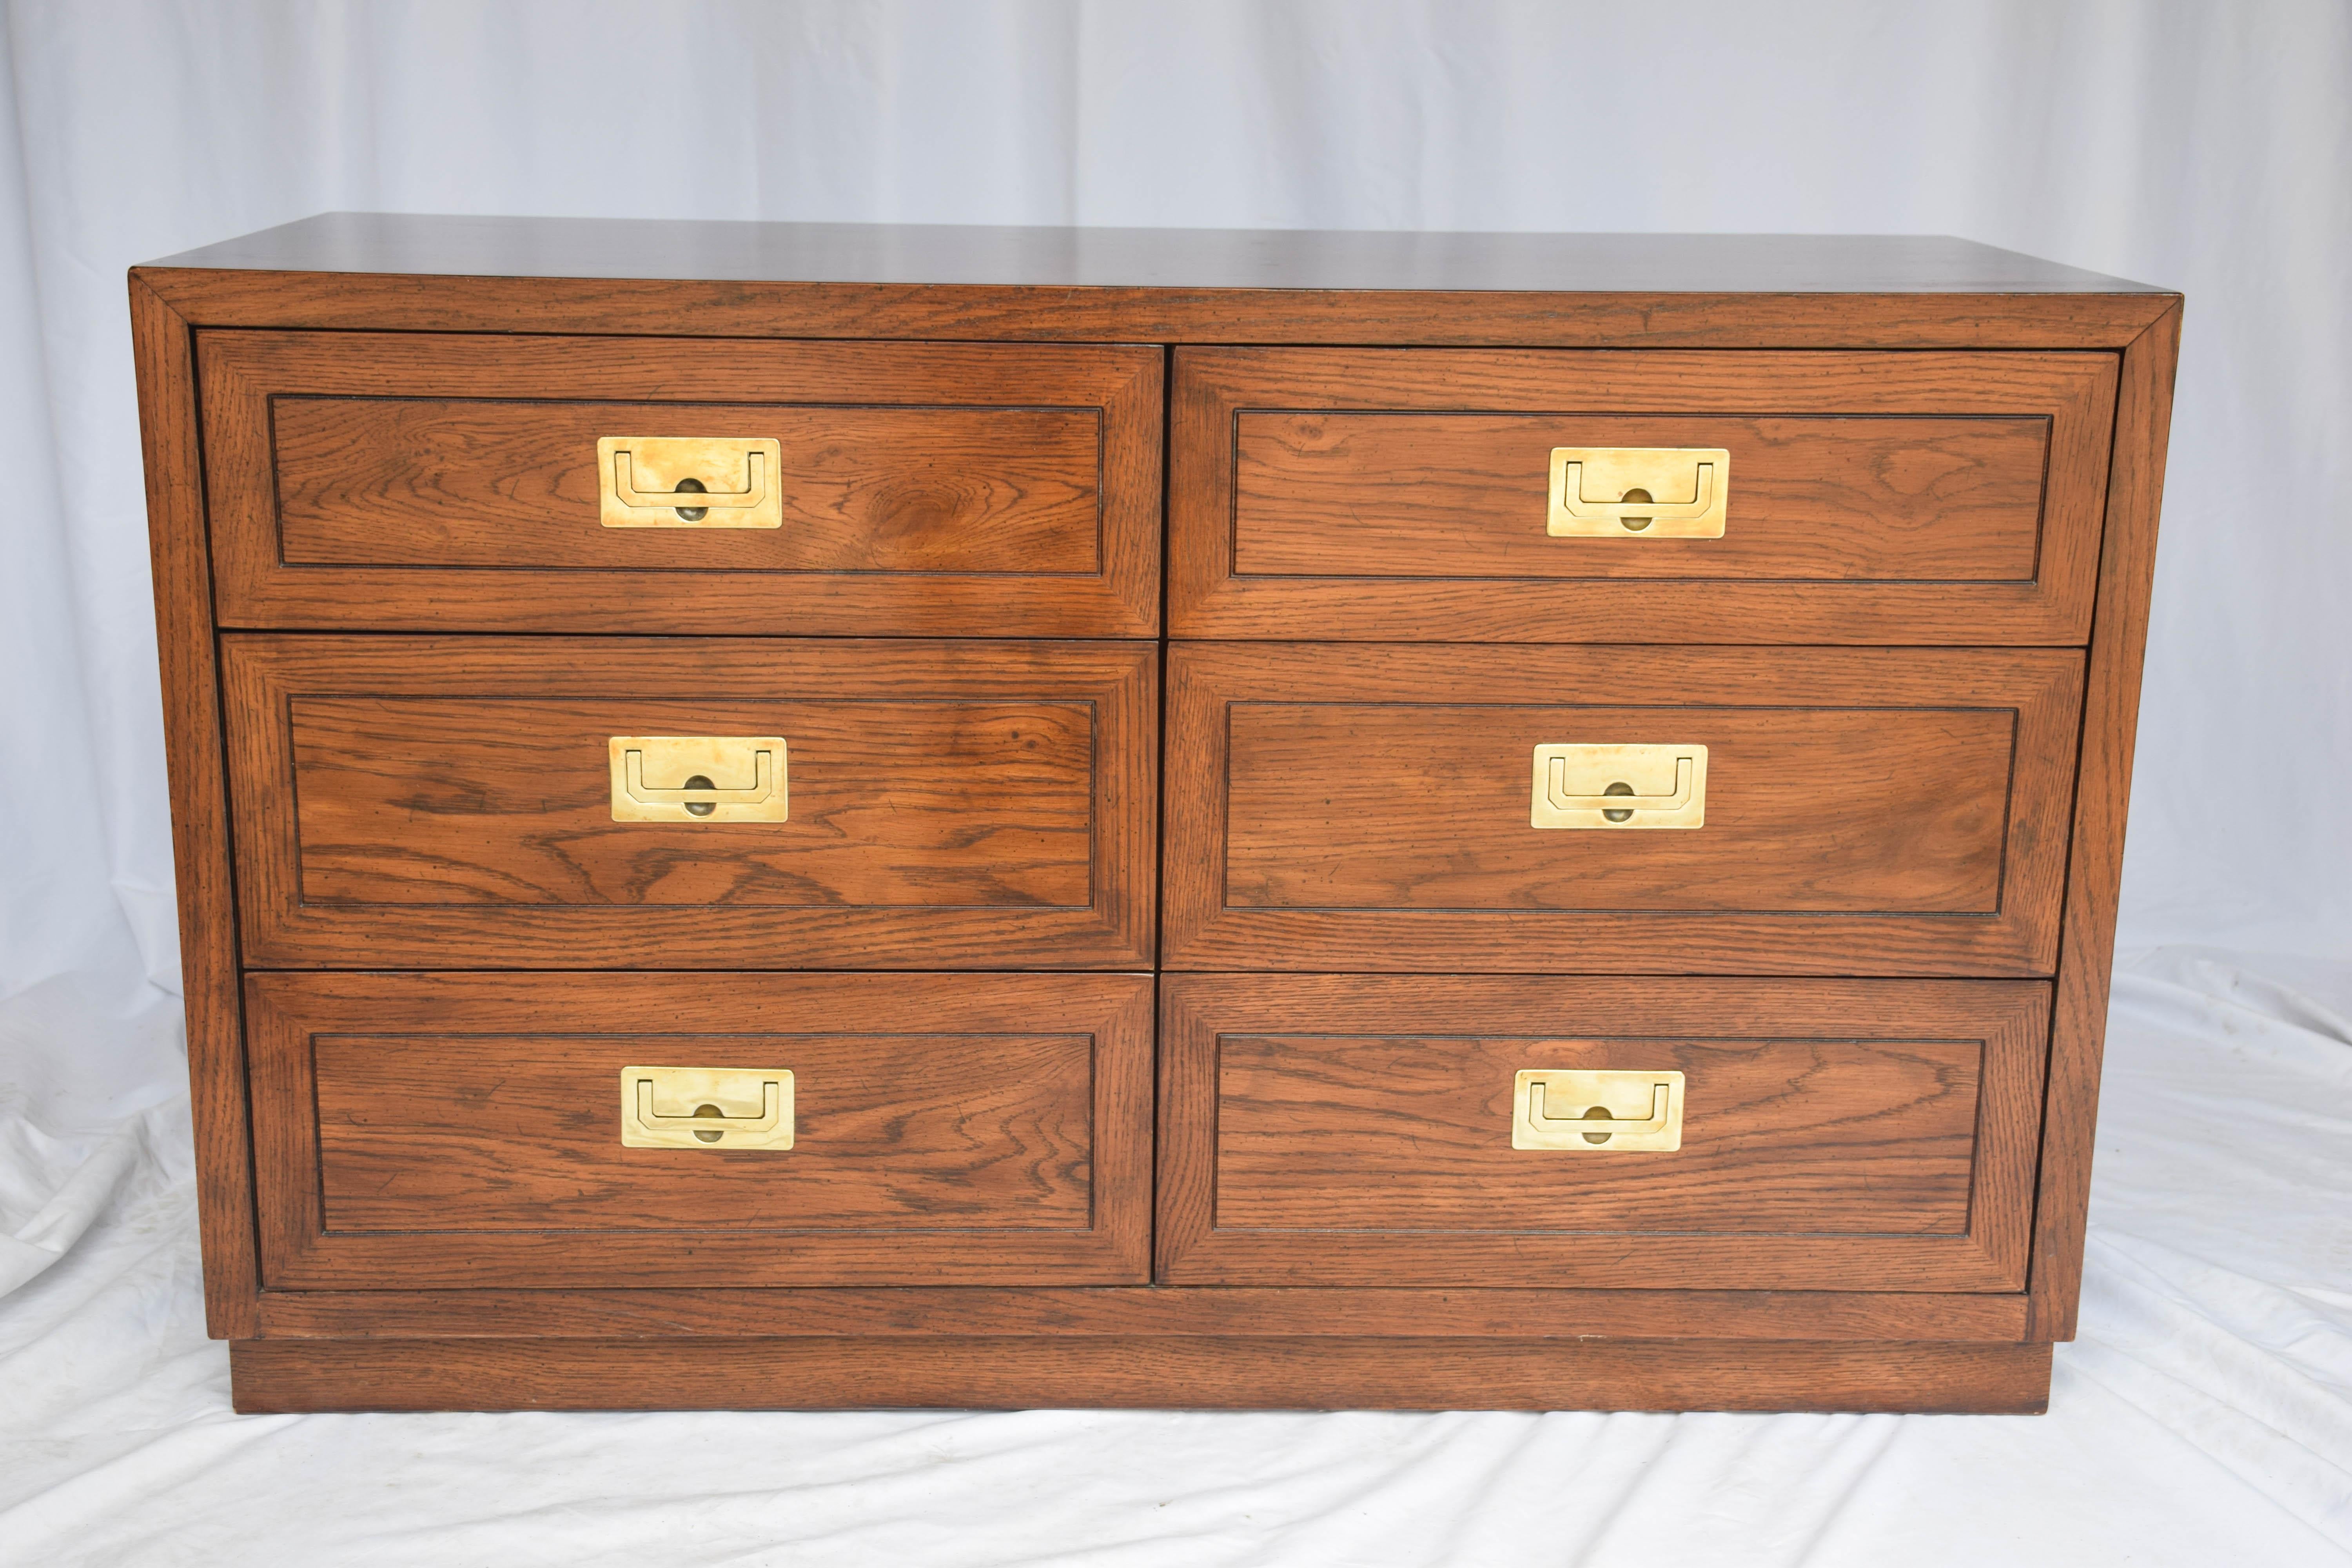 Vintage Campaign style chest of drawers by Henredon, Scene One collection. The chest six drawers fitted with brass pulls. One drawer interior is stamped “Henredon Fine Furniture.” A perfect piece to add Mid-Century Modern to your home or office.
 